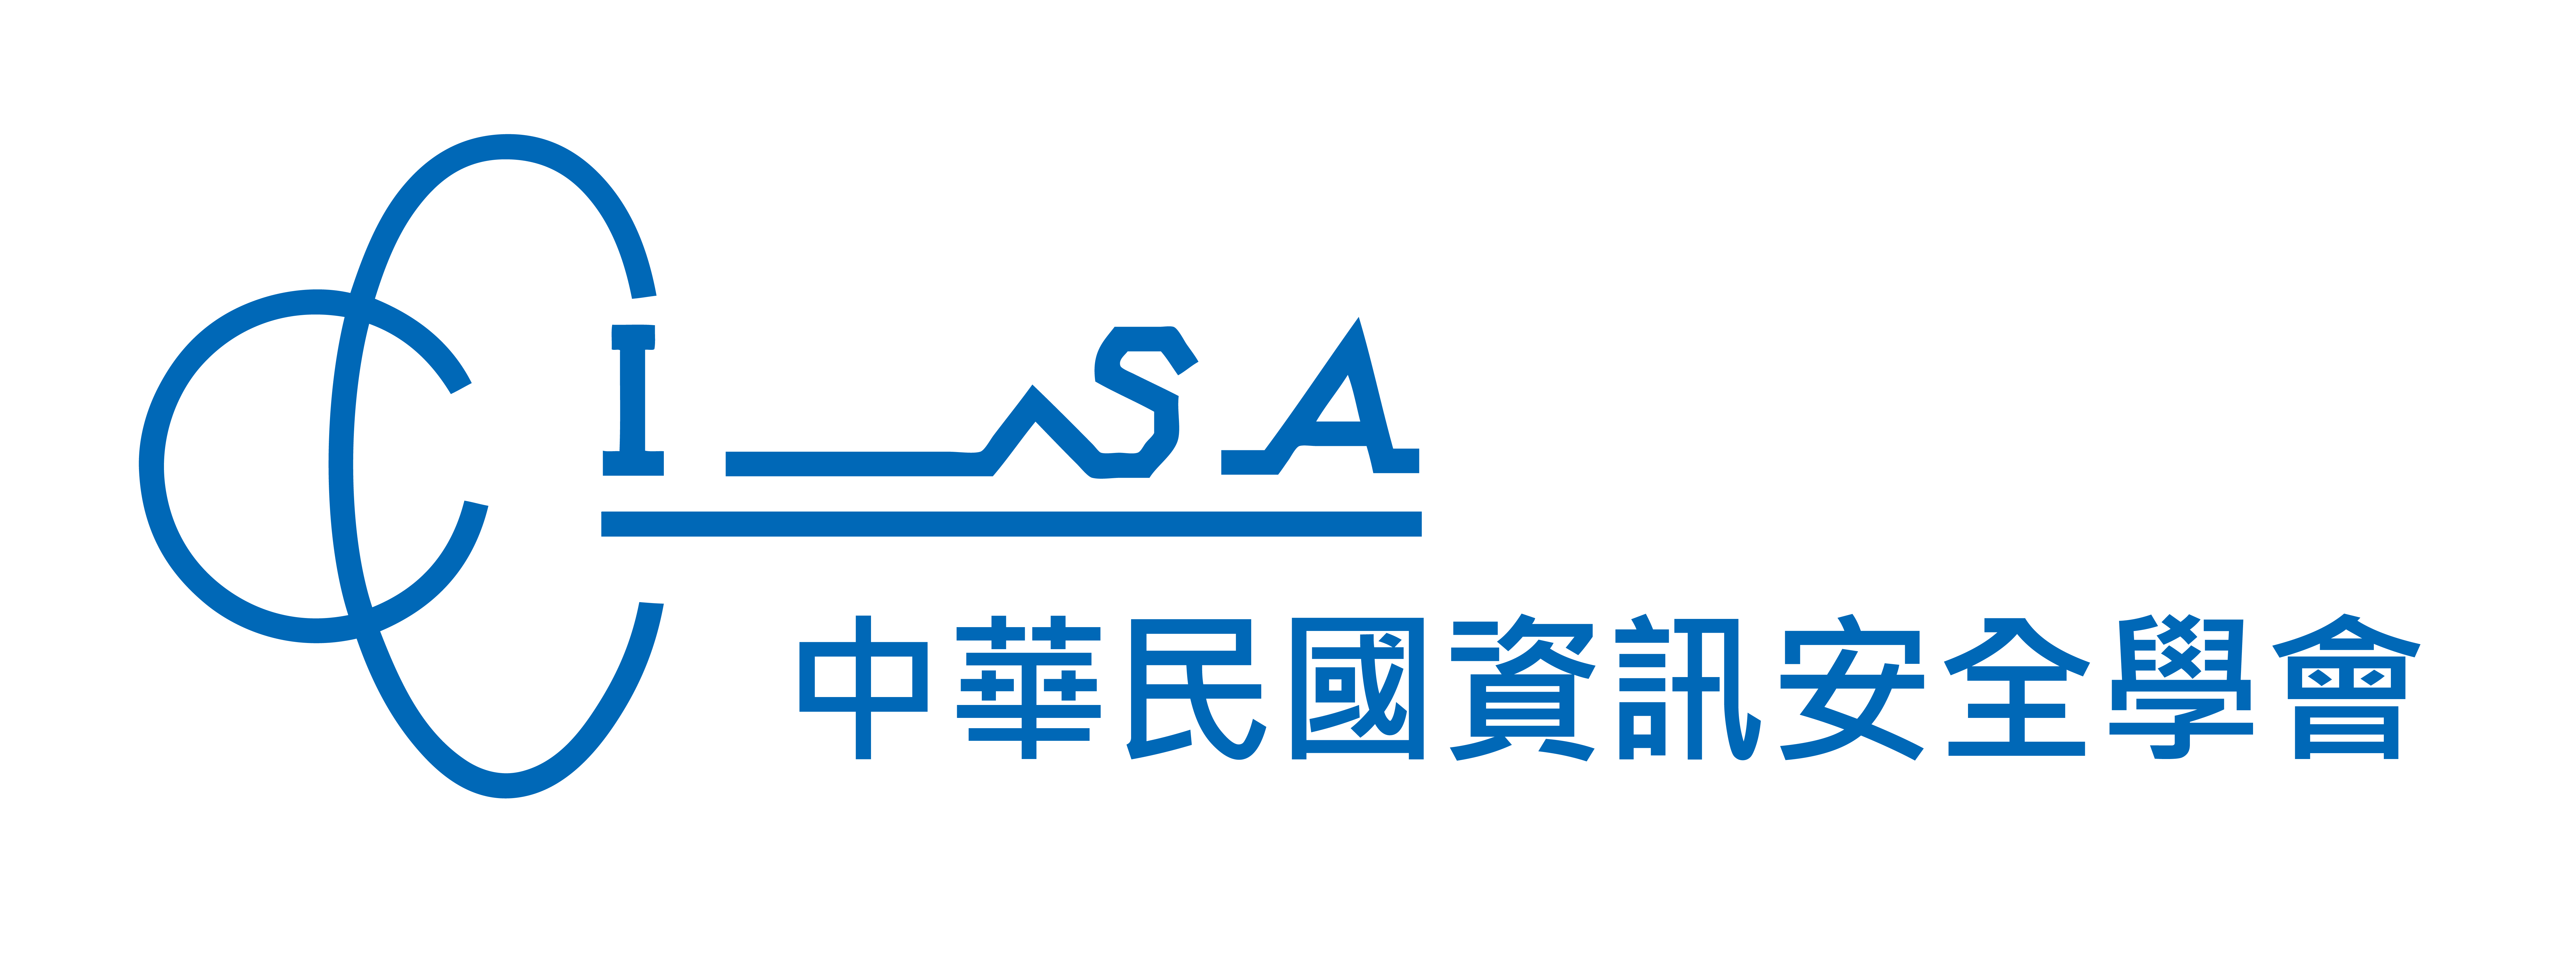 the logo of the Chinese Cryptology and Information
        Security Association, which is the letters CCISA in the Roman alphabet, with
        Chinese characters underneath, all done in a medium-dark shade of blue